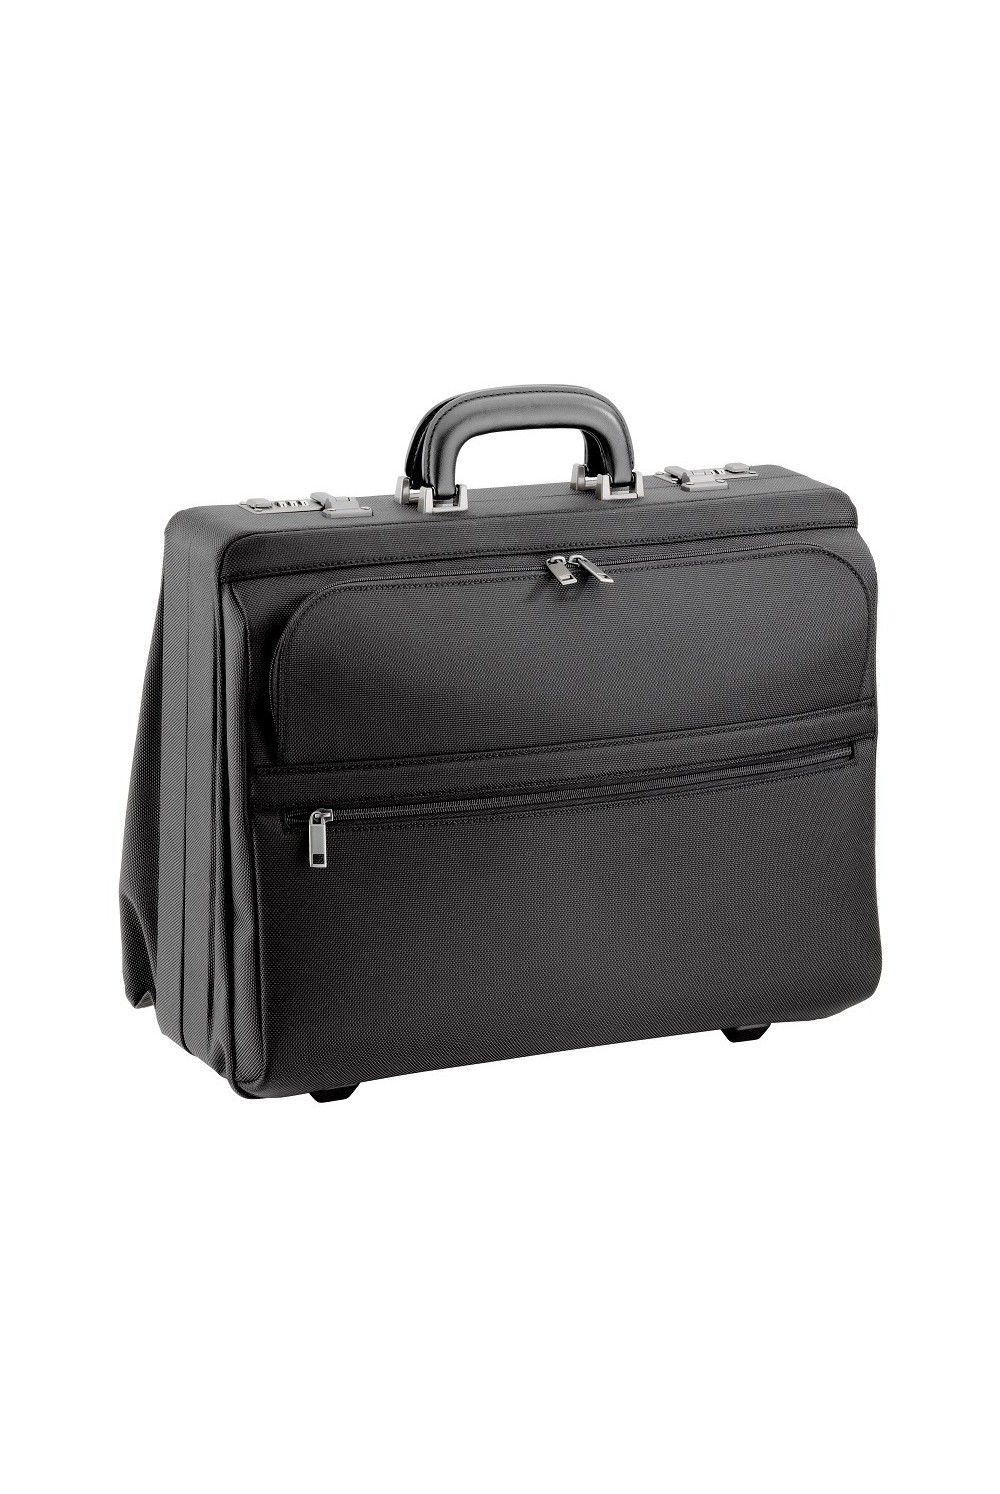 D & N briefcase with compartments 2649